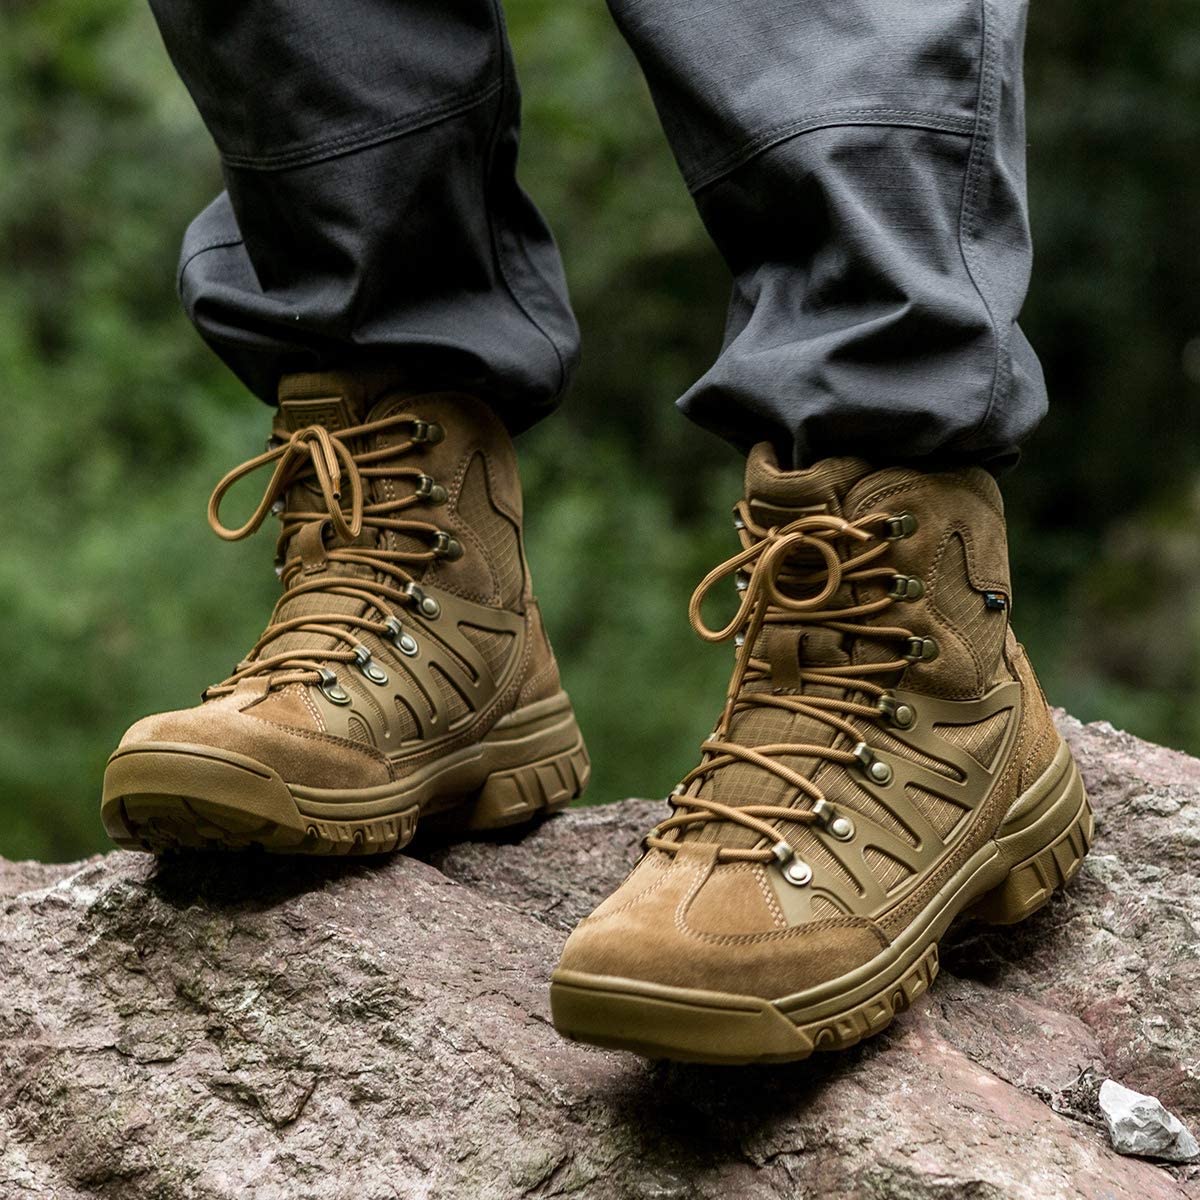 FREE SOLDIER Outdoor Men's Tactical Military Combat Ankle Boots Water ...